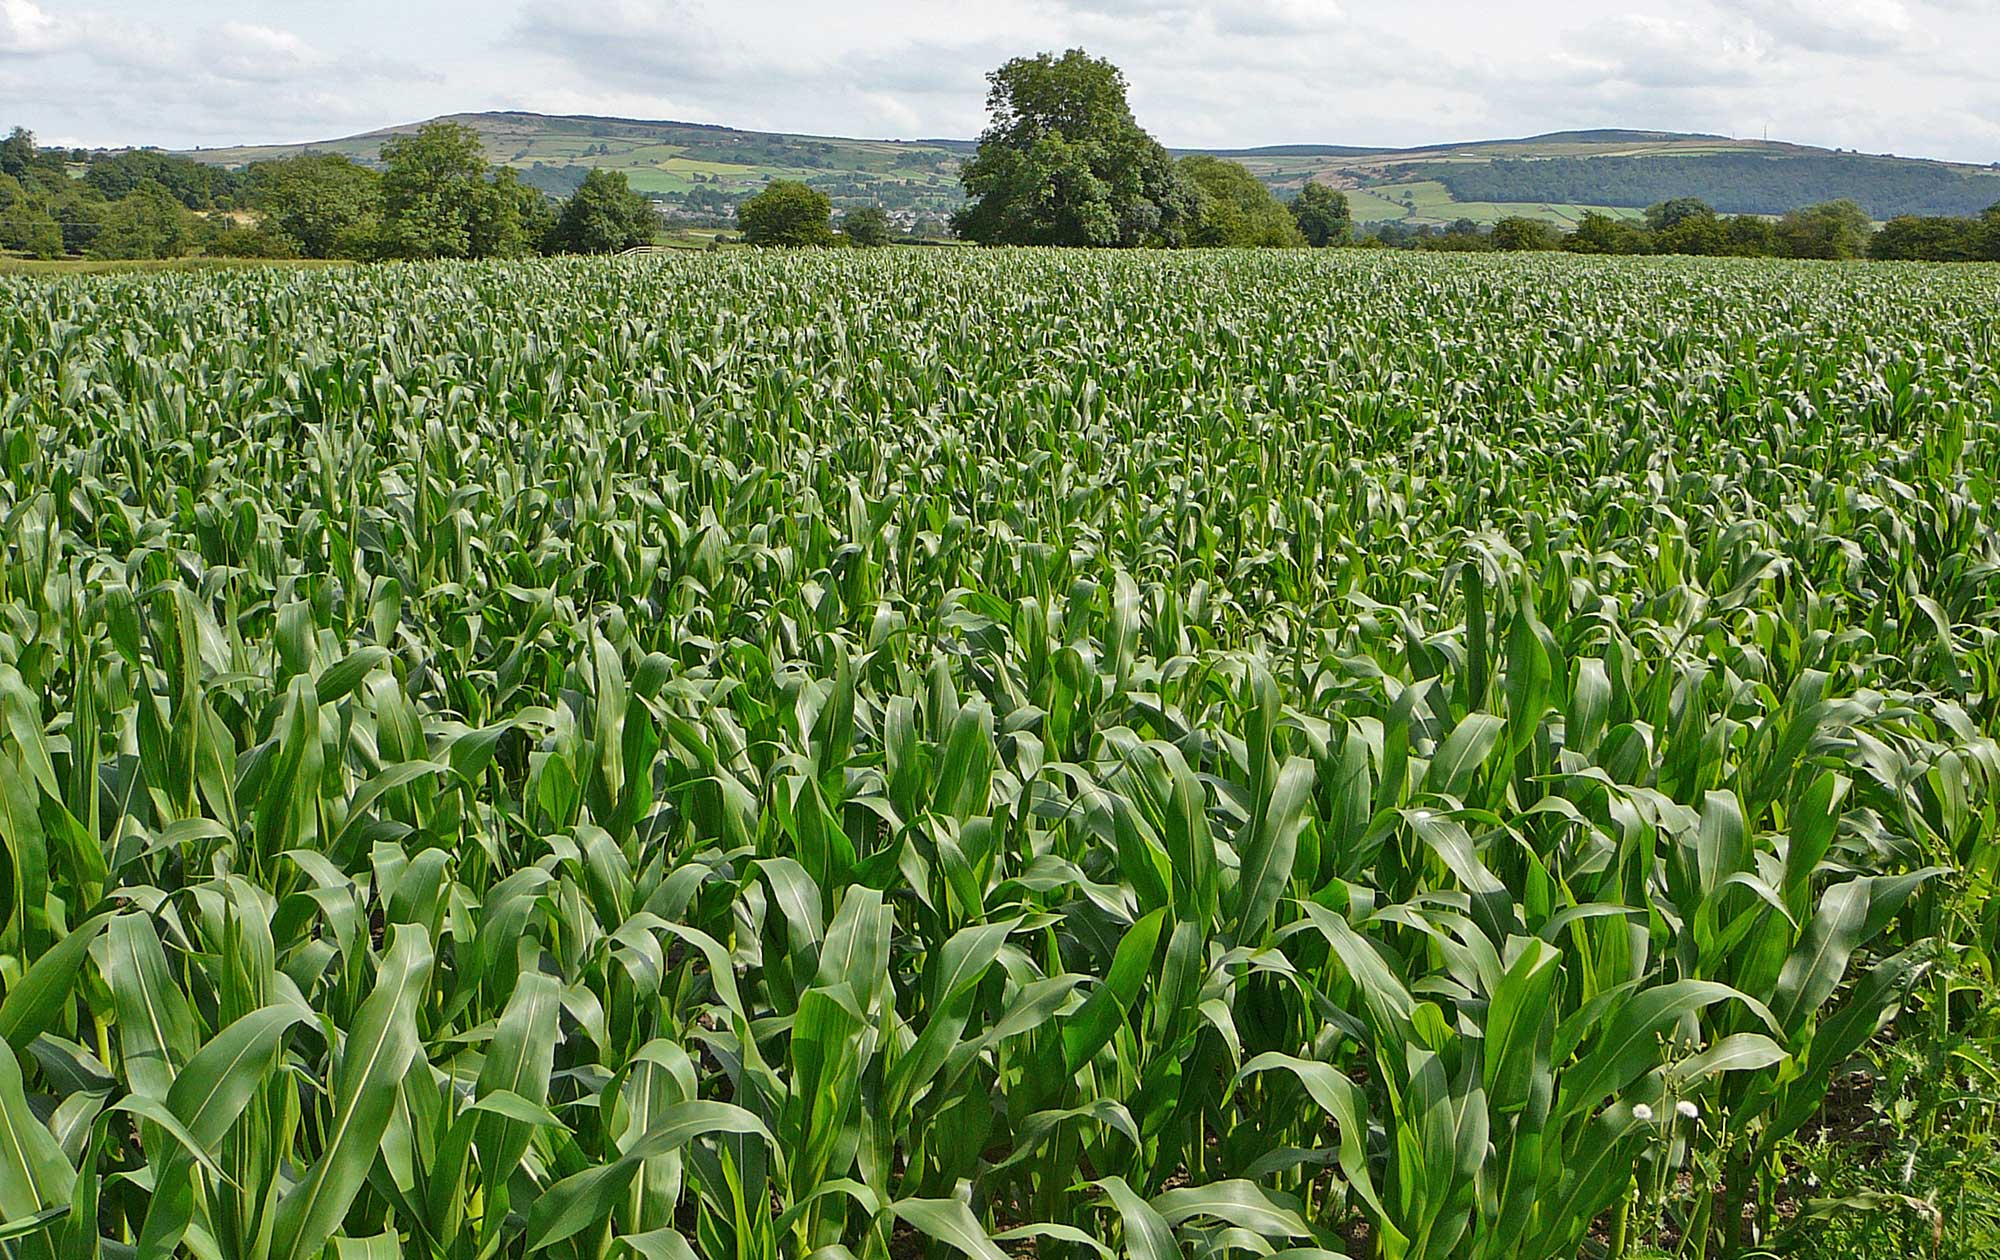 Photograph of maize plants growing in a cultivated field. The plants in the image do not yet have tassels, but are large enough that they obscure the ground.